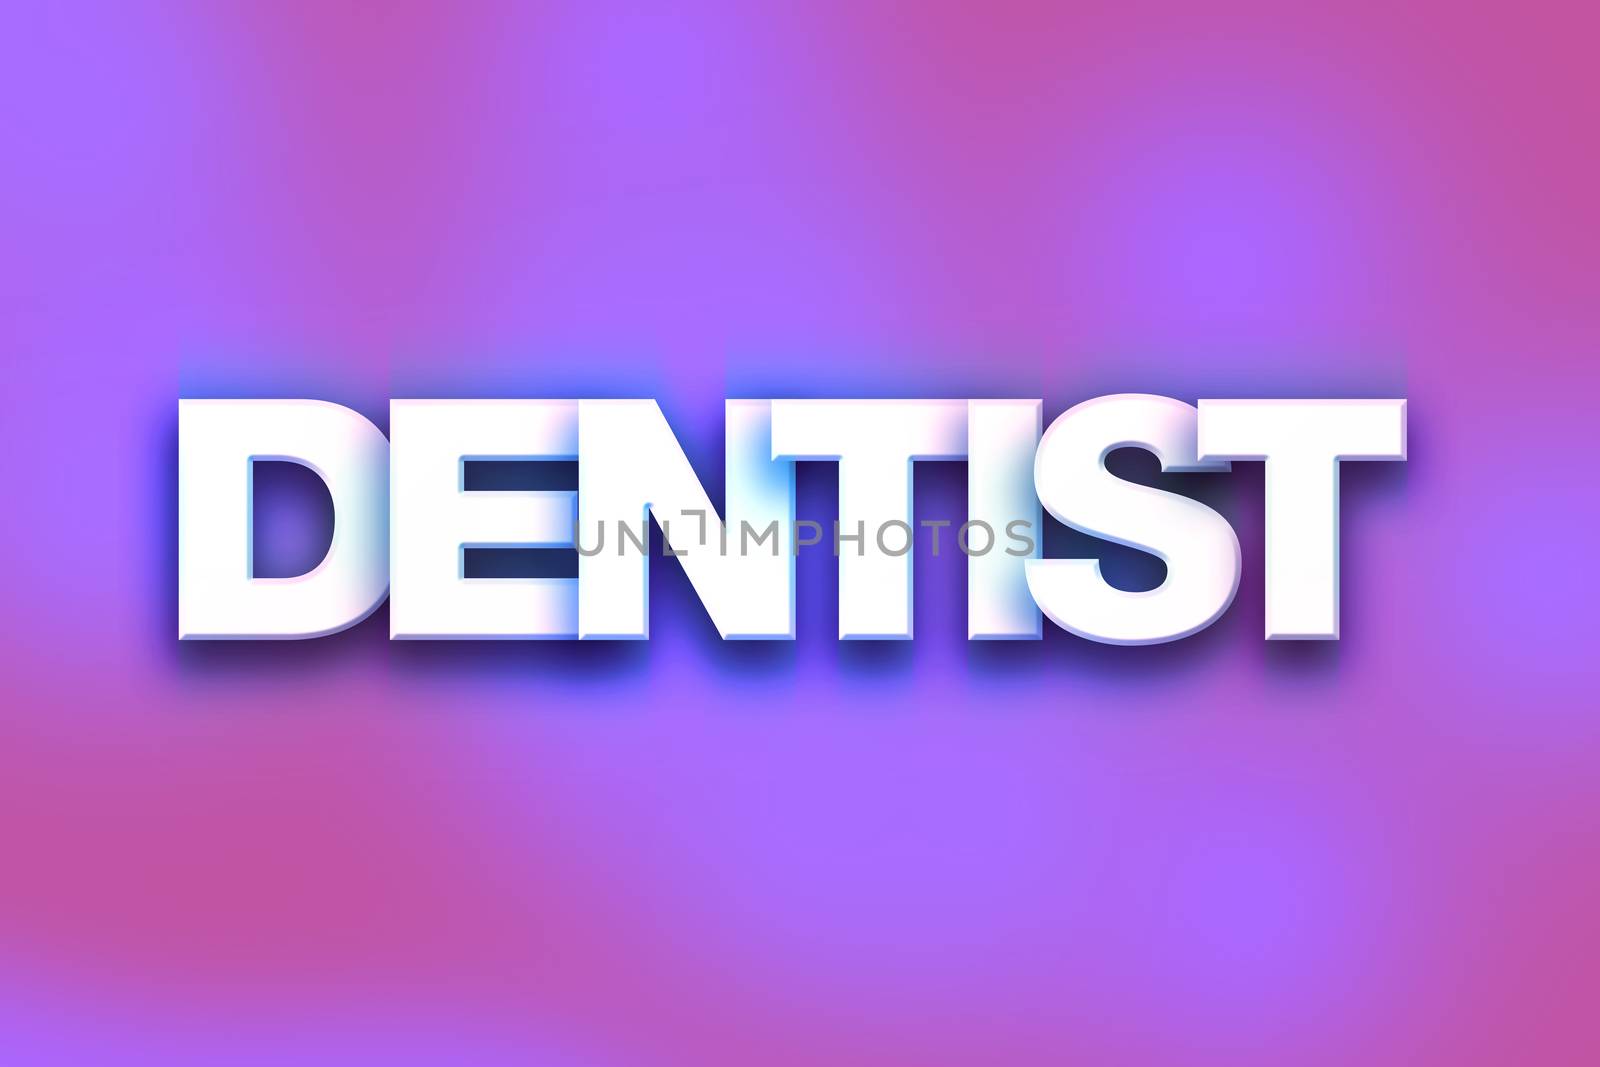 The word "Dentist" written in white 3D letters on a colorful background concept and theme.